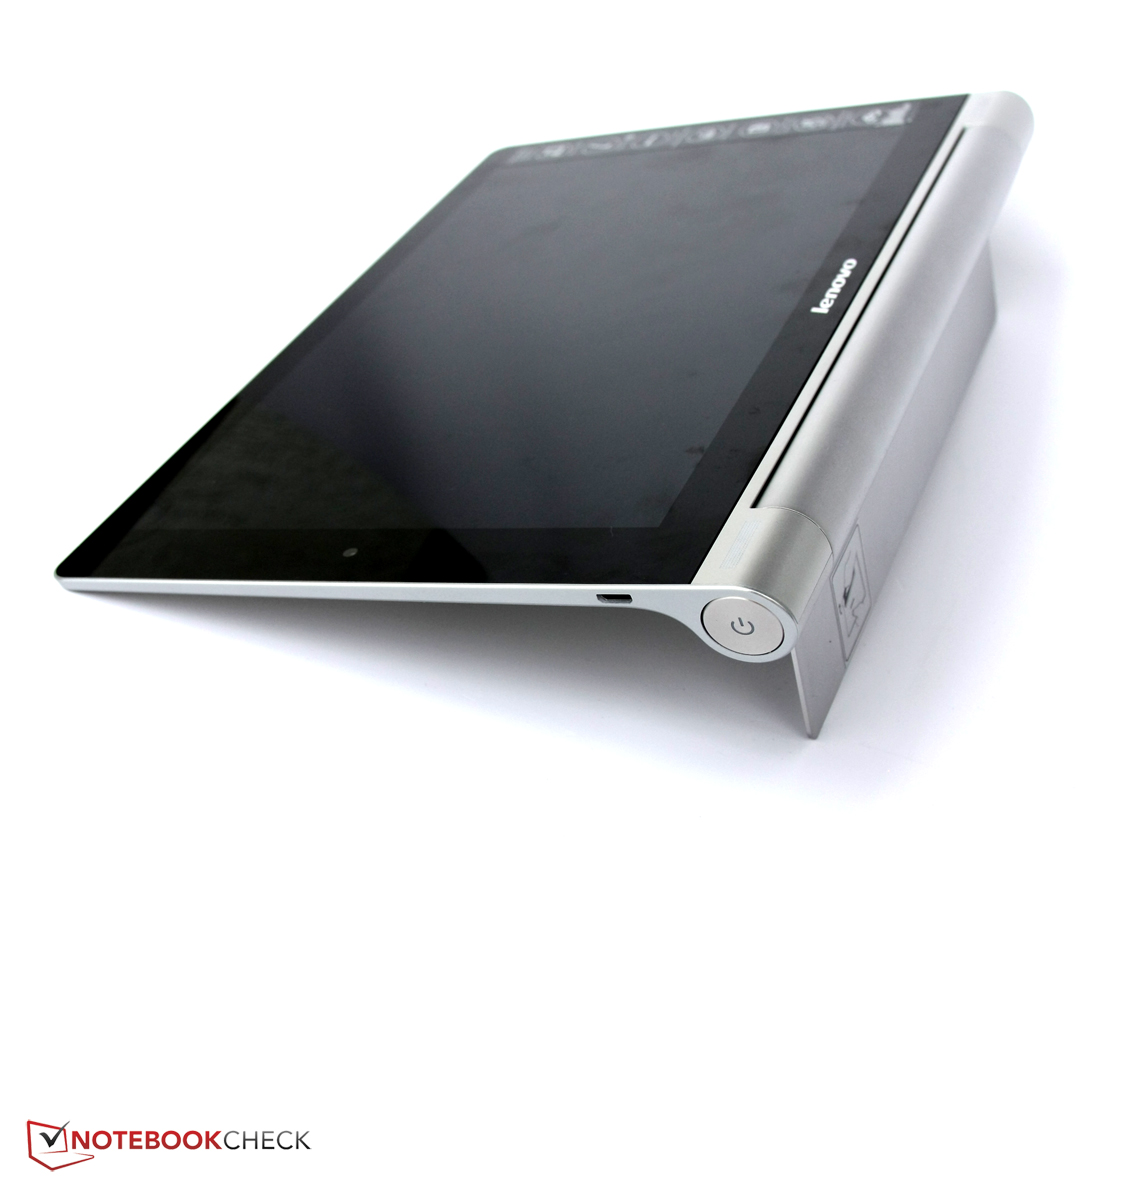 Lenovo Yoga Tablet 10 HD+ Review - NotebookCheck.net Reviews